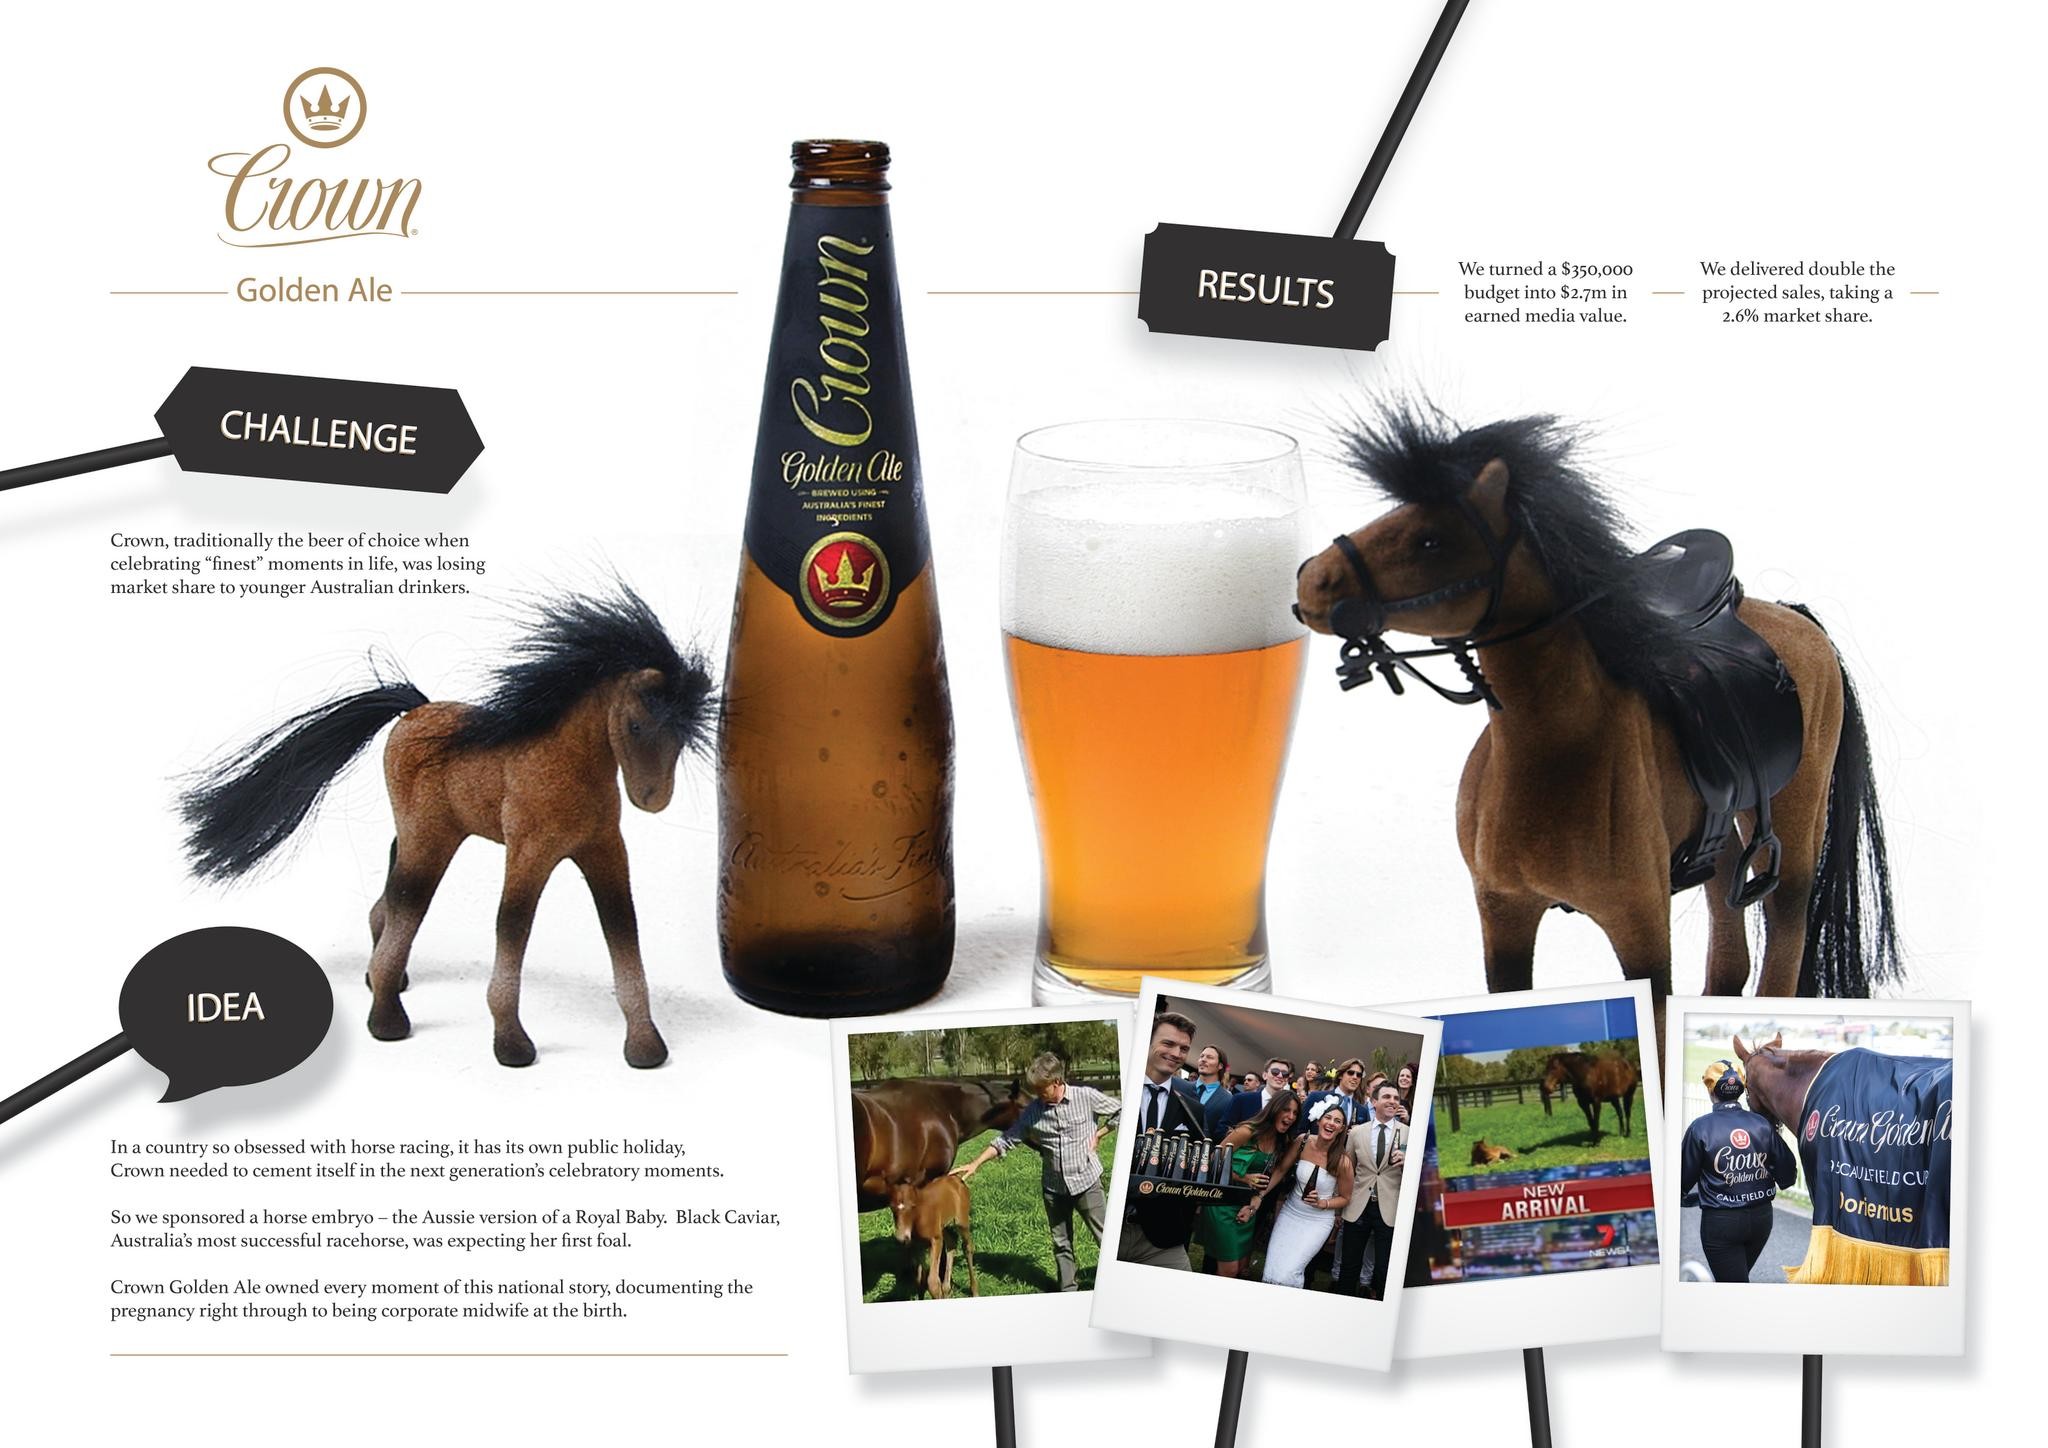 THE ONE ABOUT A BEER AND A HORSE EMBRYO…